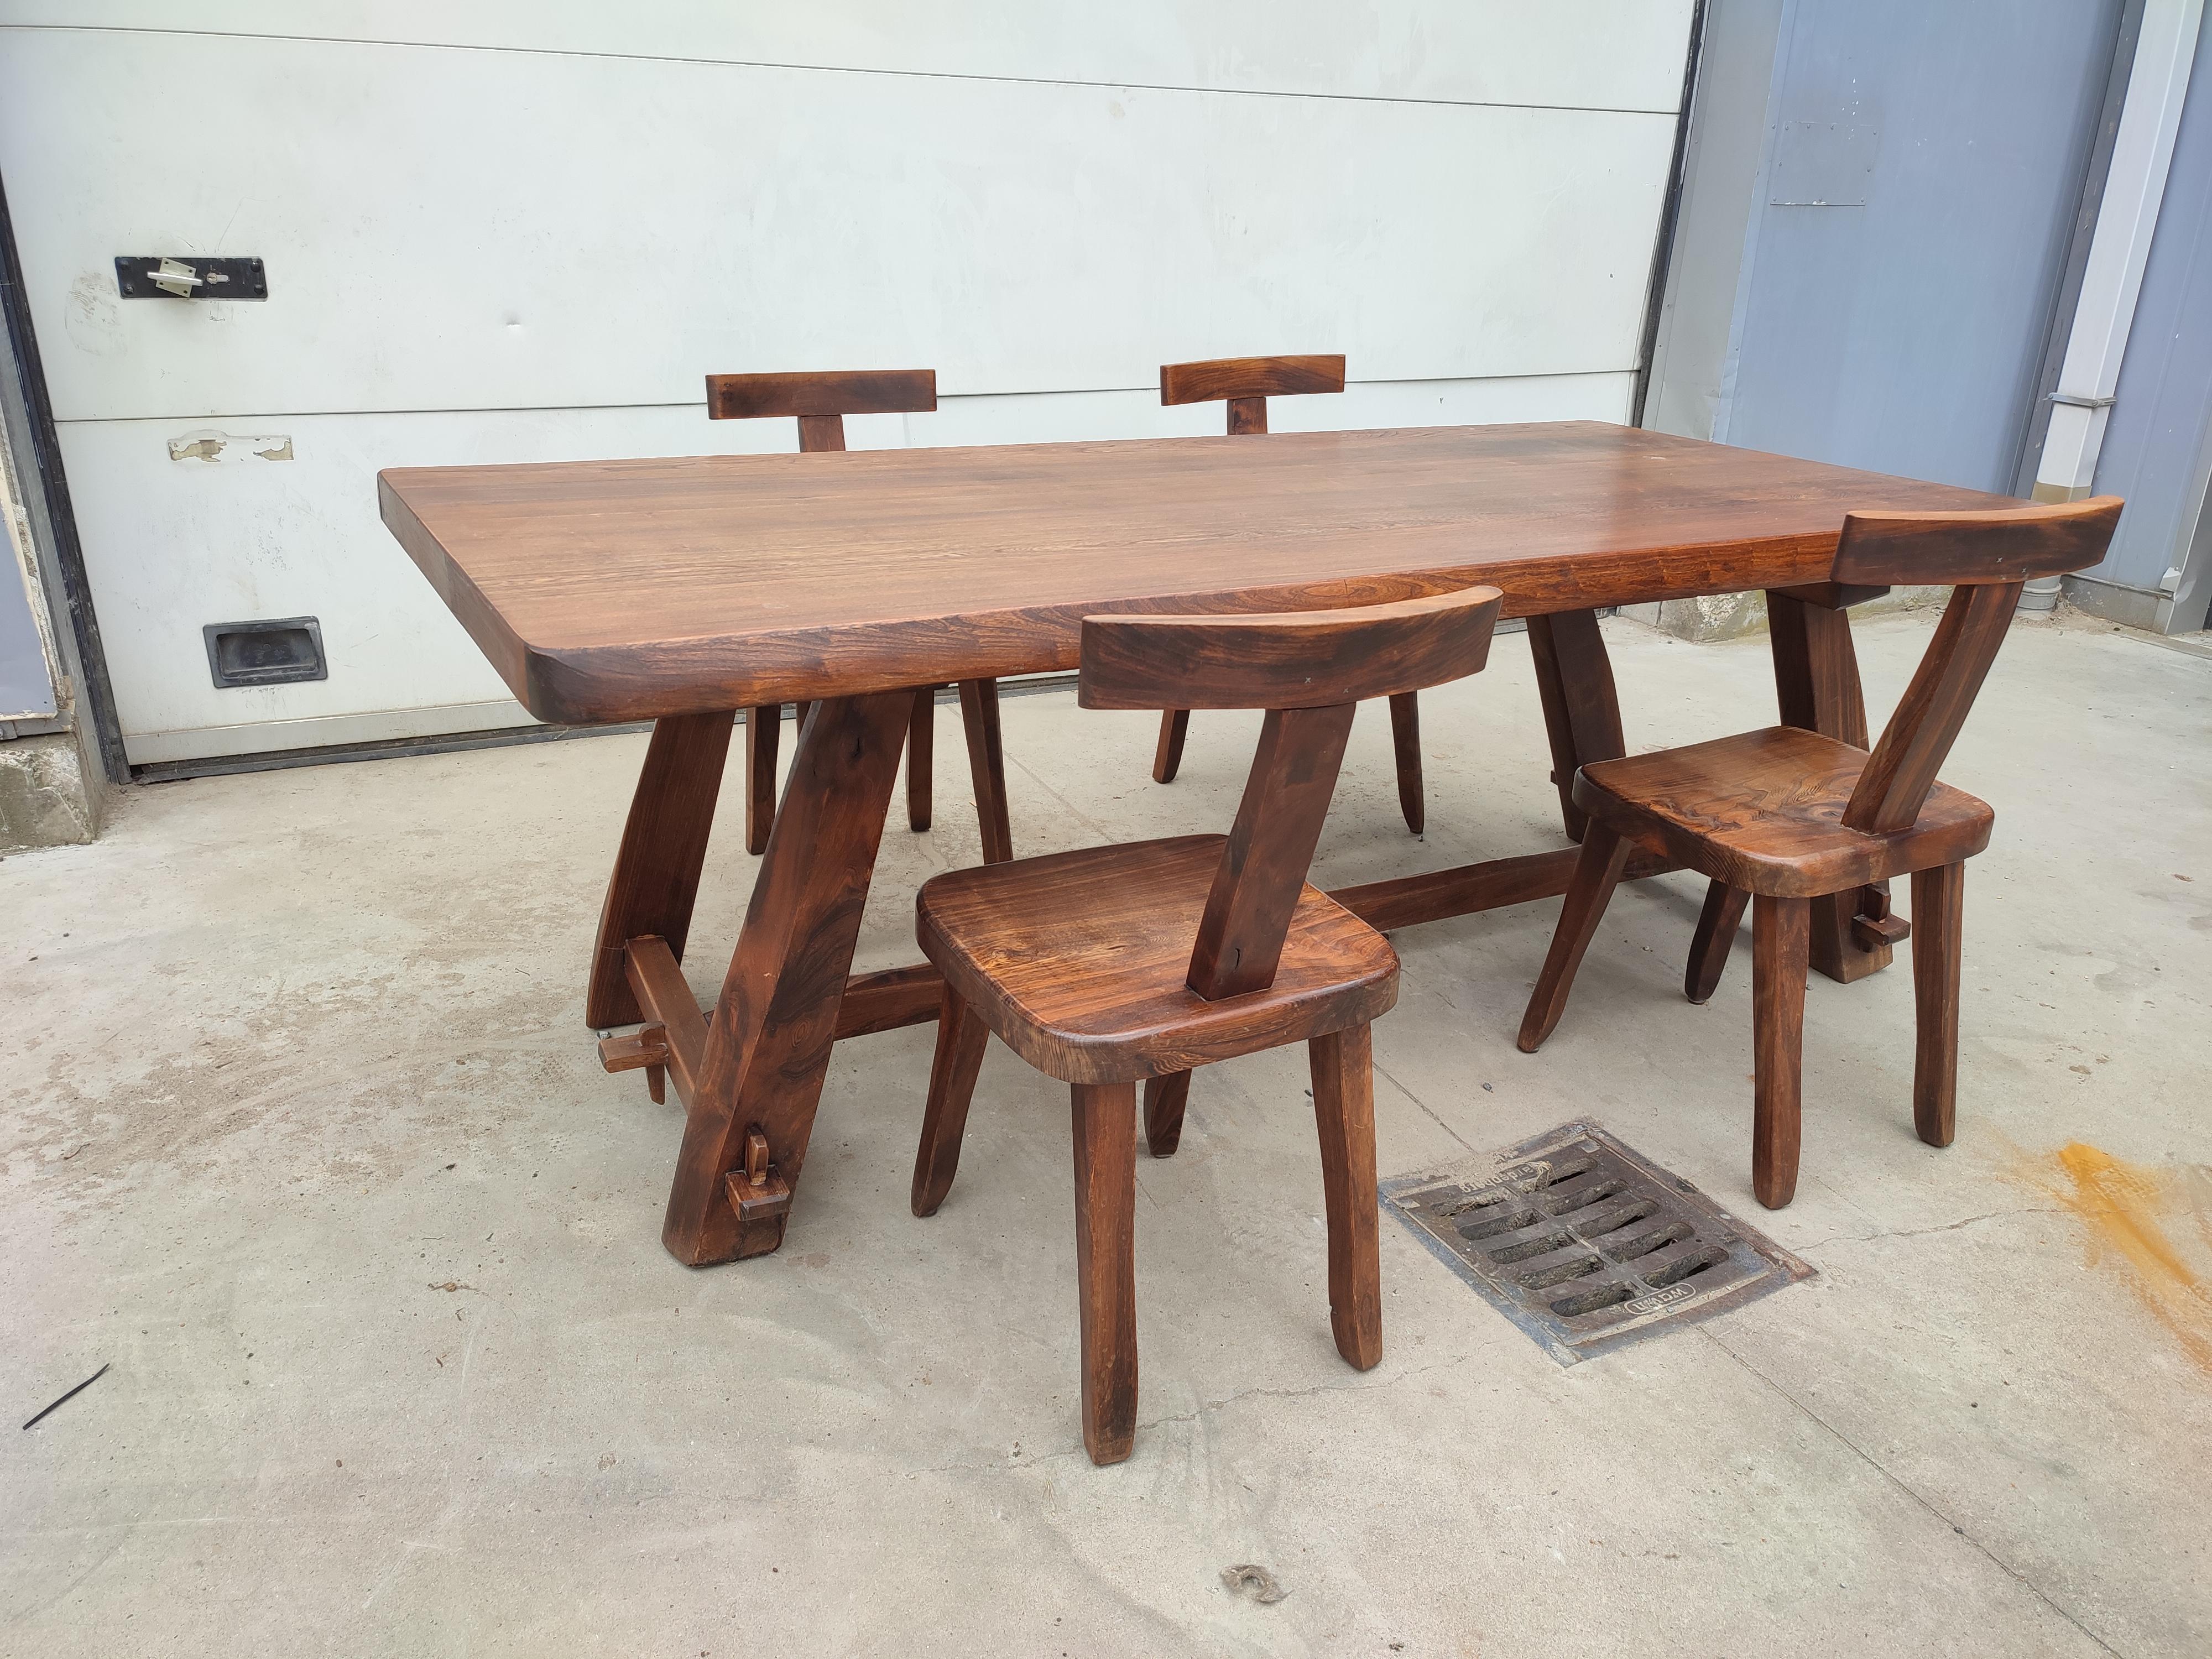 The set contains 1 bench, 1 dining table , 4 chairs. Very good condition. setprice !
attributed to Olavi Haninnen.